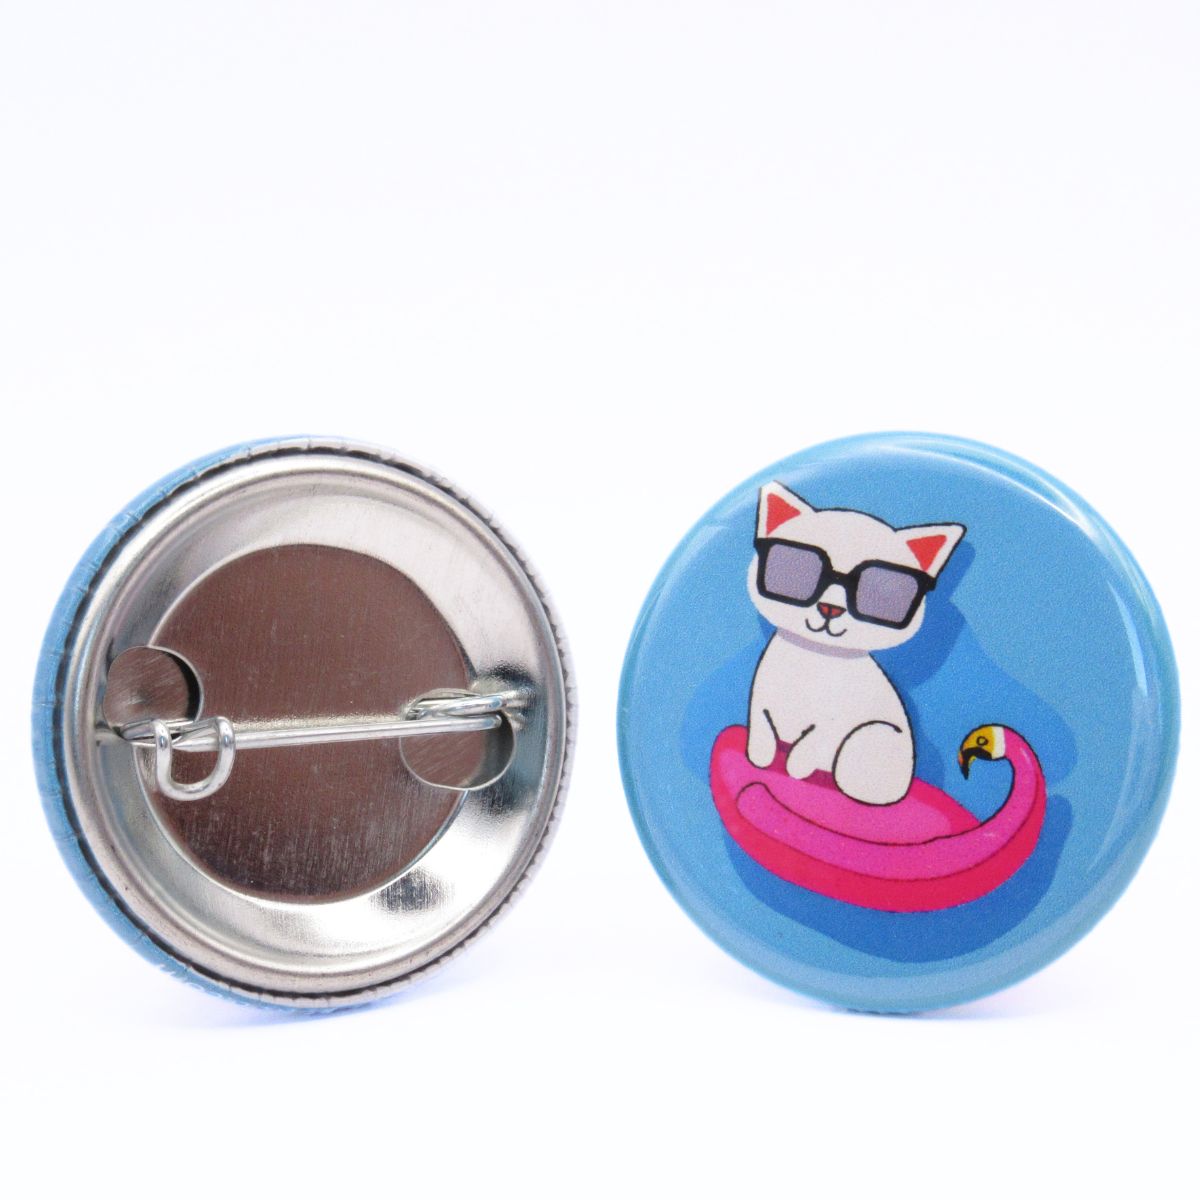 BooBooRoo Pinback Button (i.e. button, badge, pin) of a white cat wearing sunglasses sitting in a flamingo pool floatie. Image showing front and back of high-quality metal button.